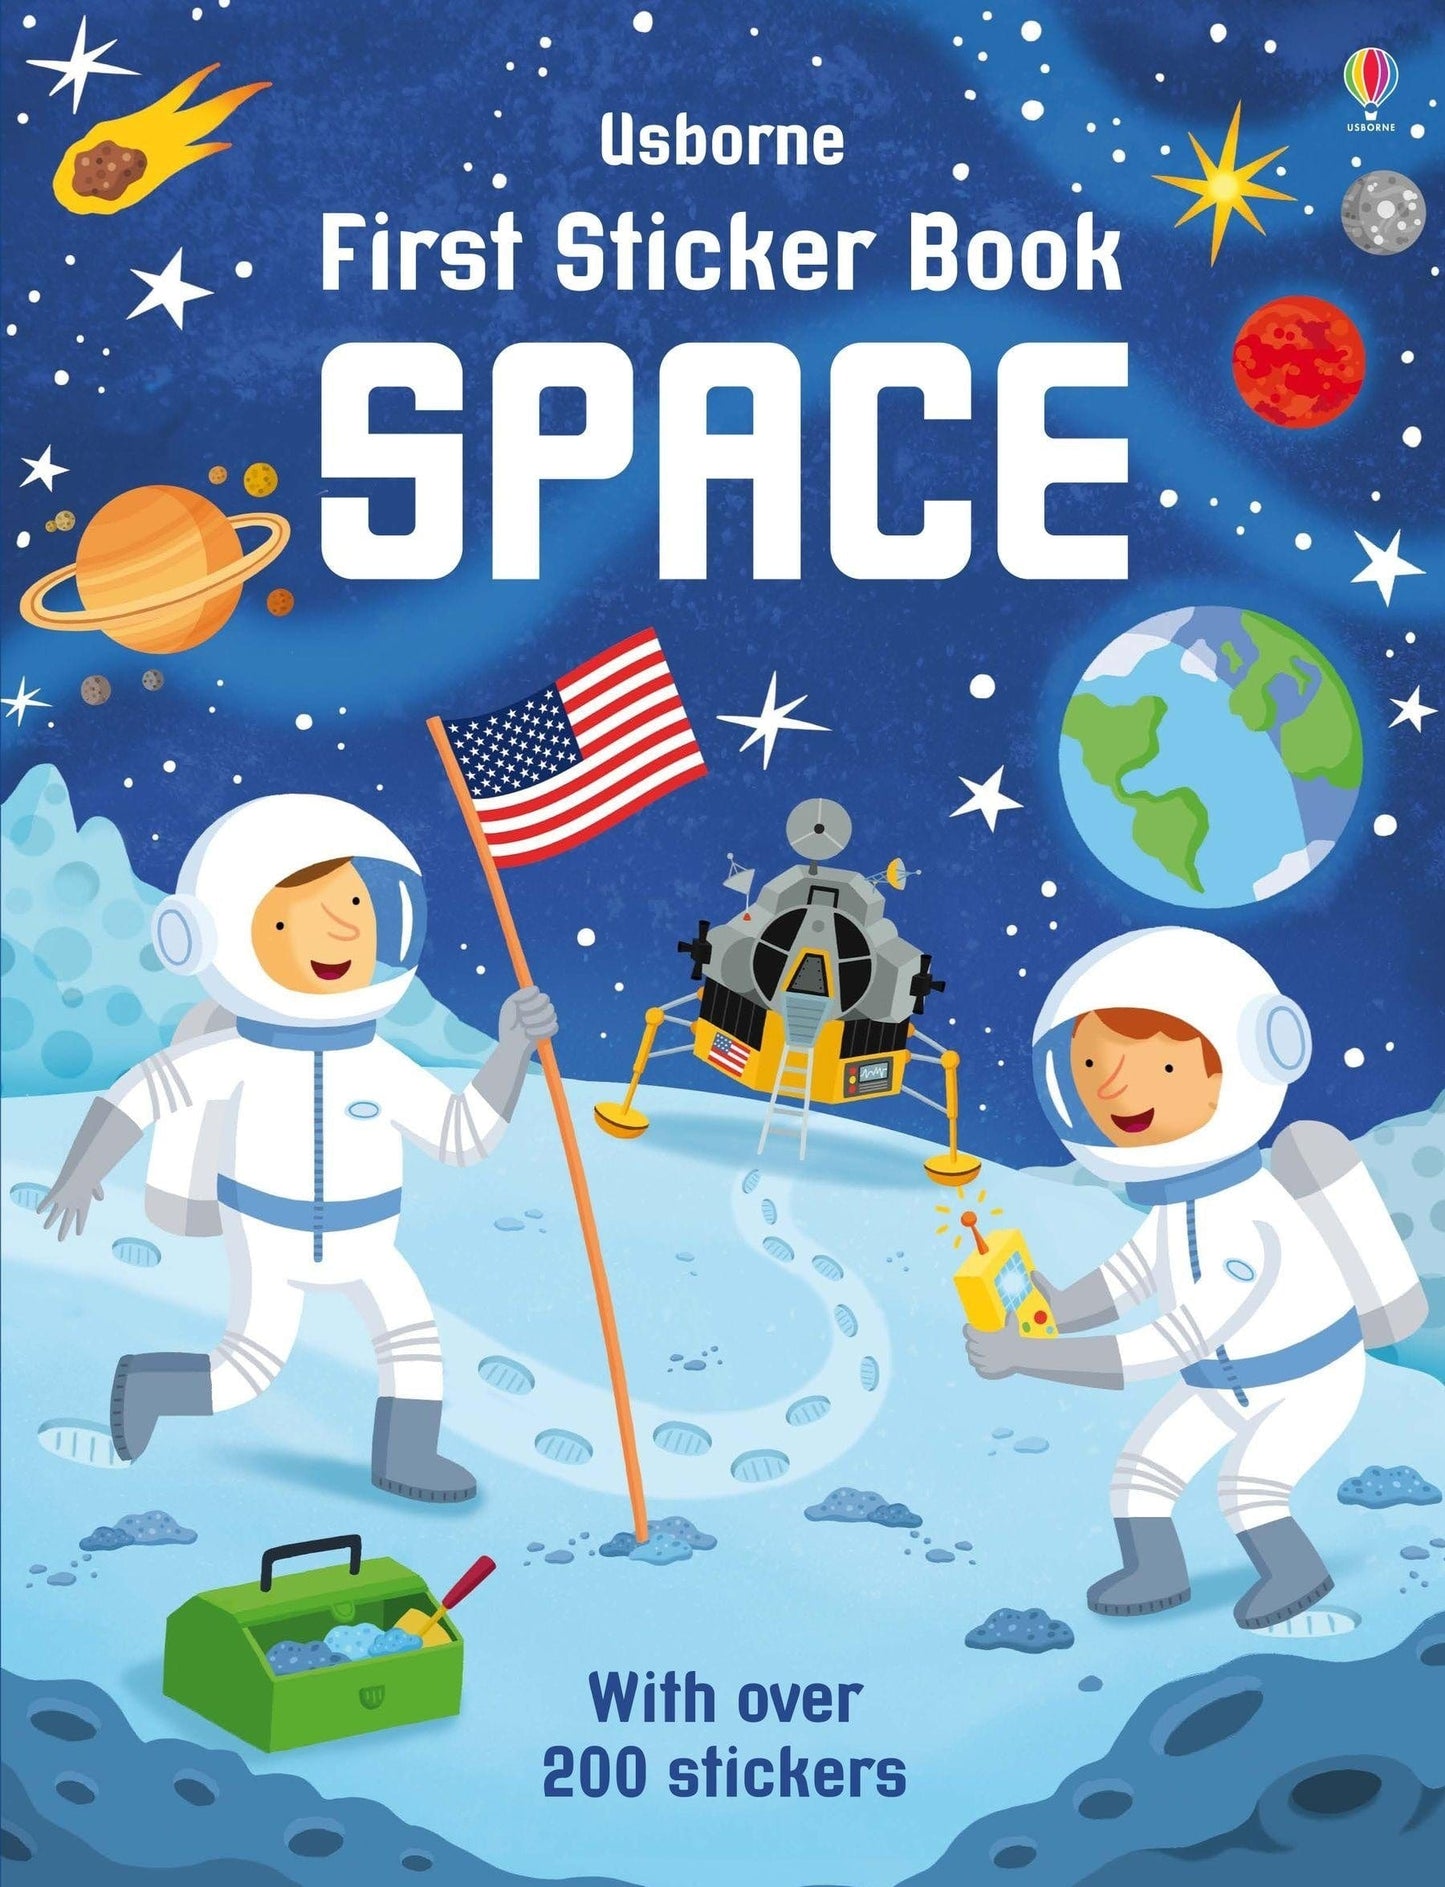 Usborne First Sticker Book Space Sam Smith  Illustrated by Alistar  Age 3+